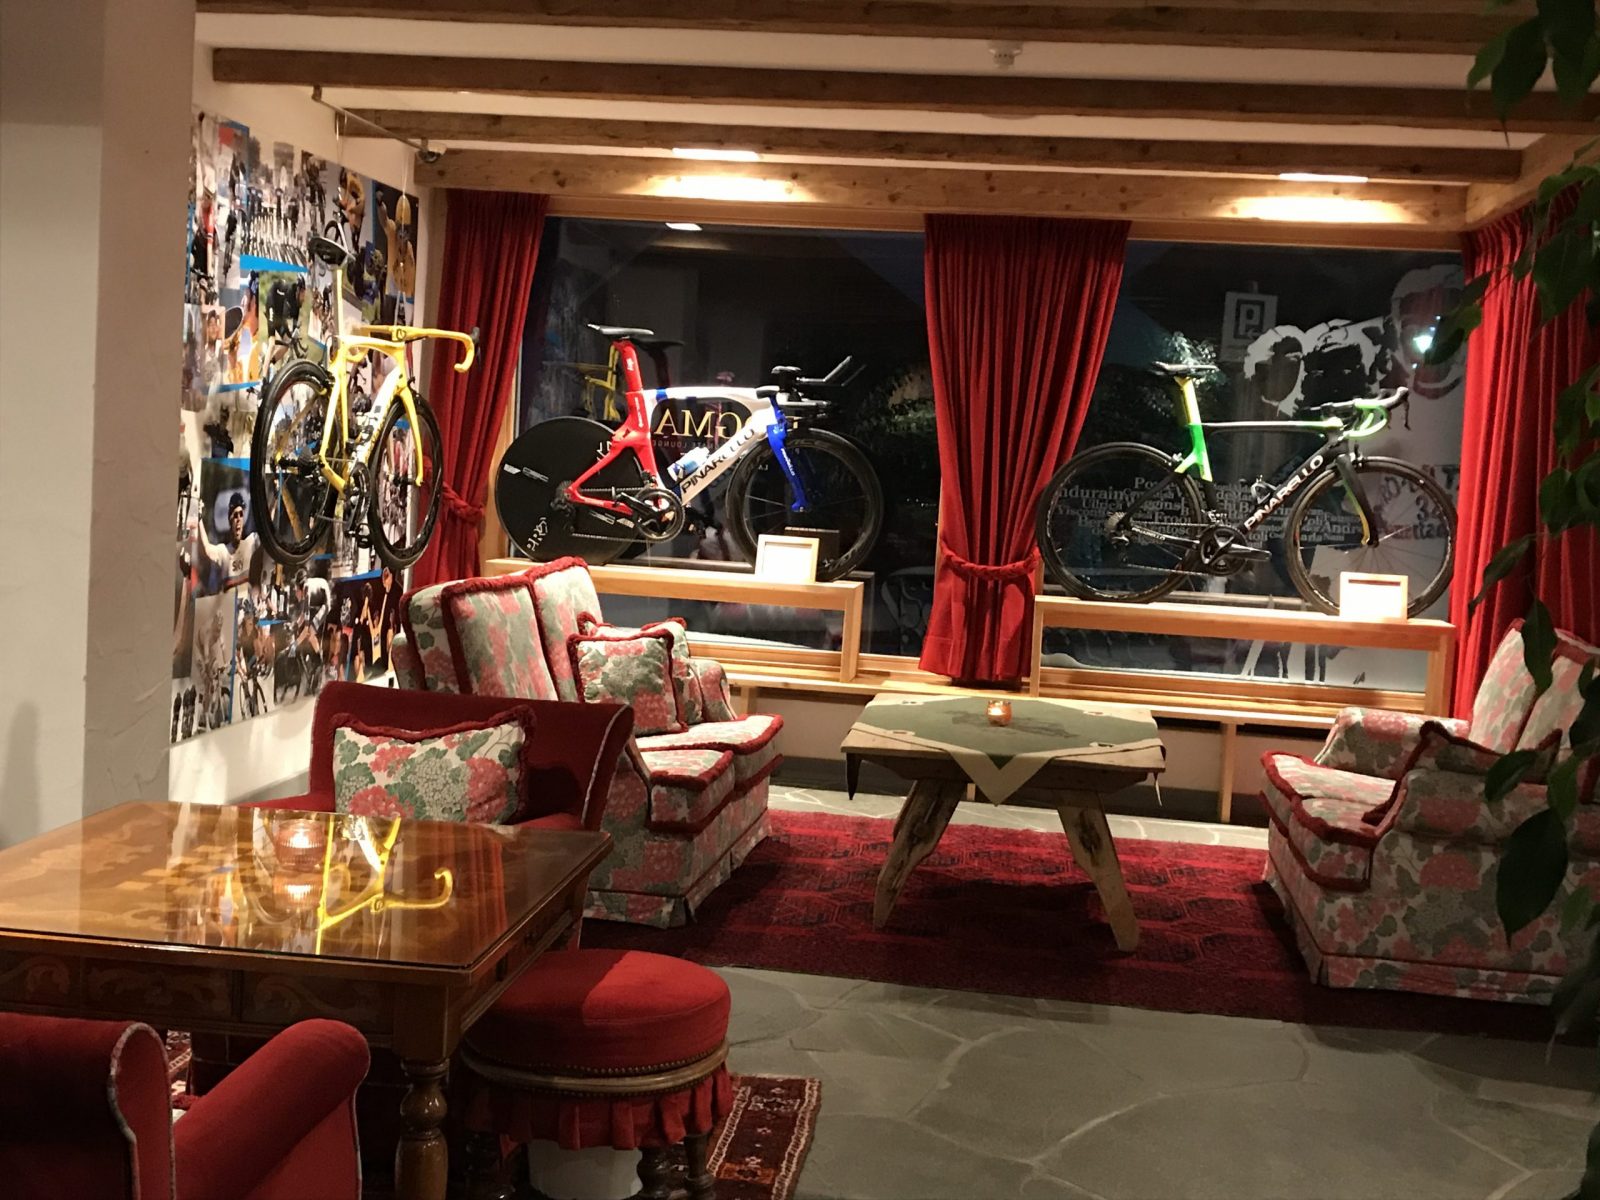 The Pinarello room at La Perla Hotel. Book your stay at the Hotel La Perla here. Planning your summer in the mountains of Alta Badia.